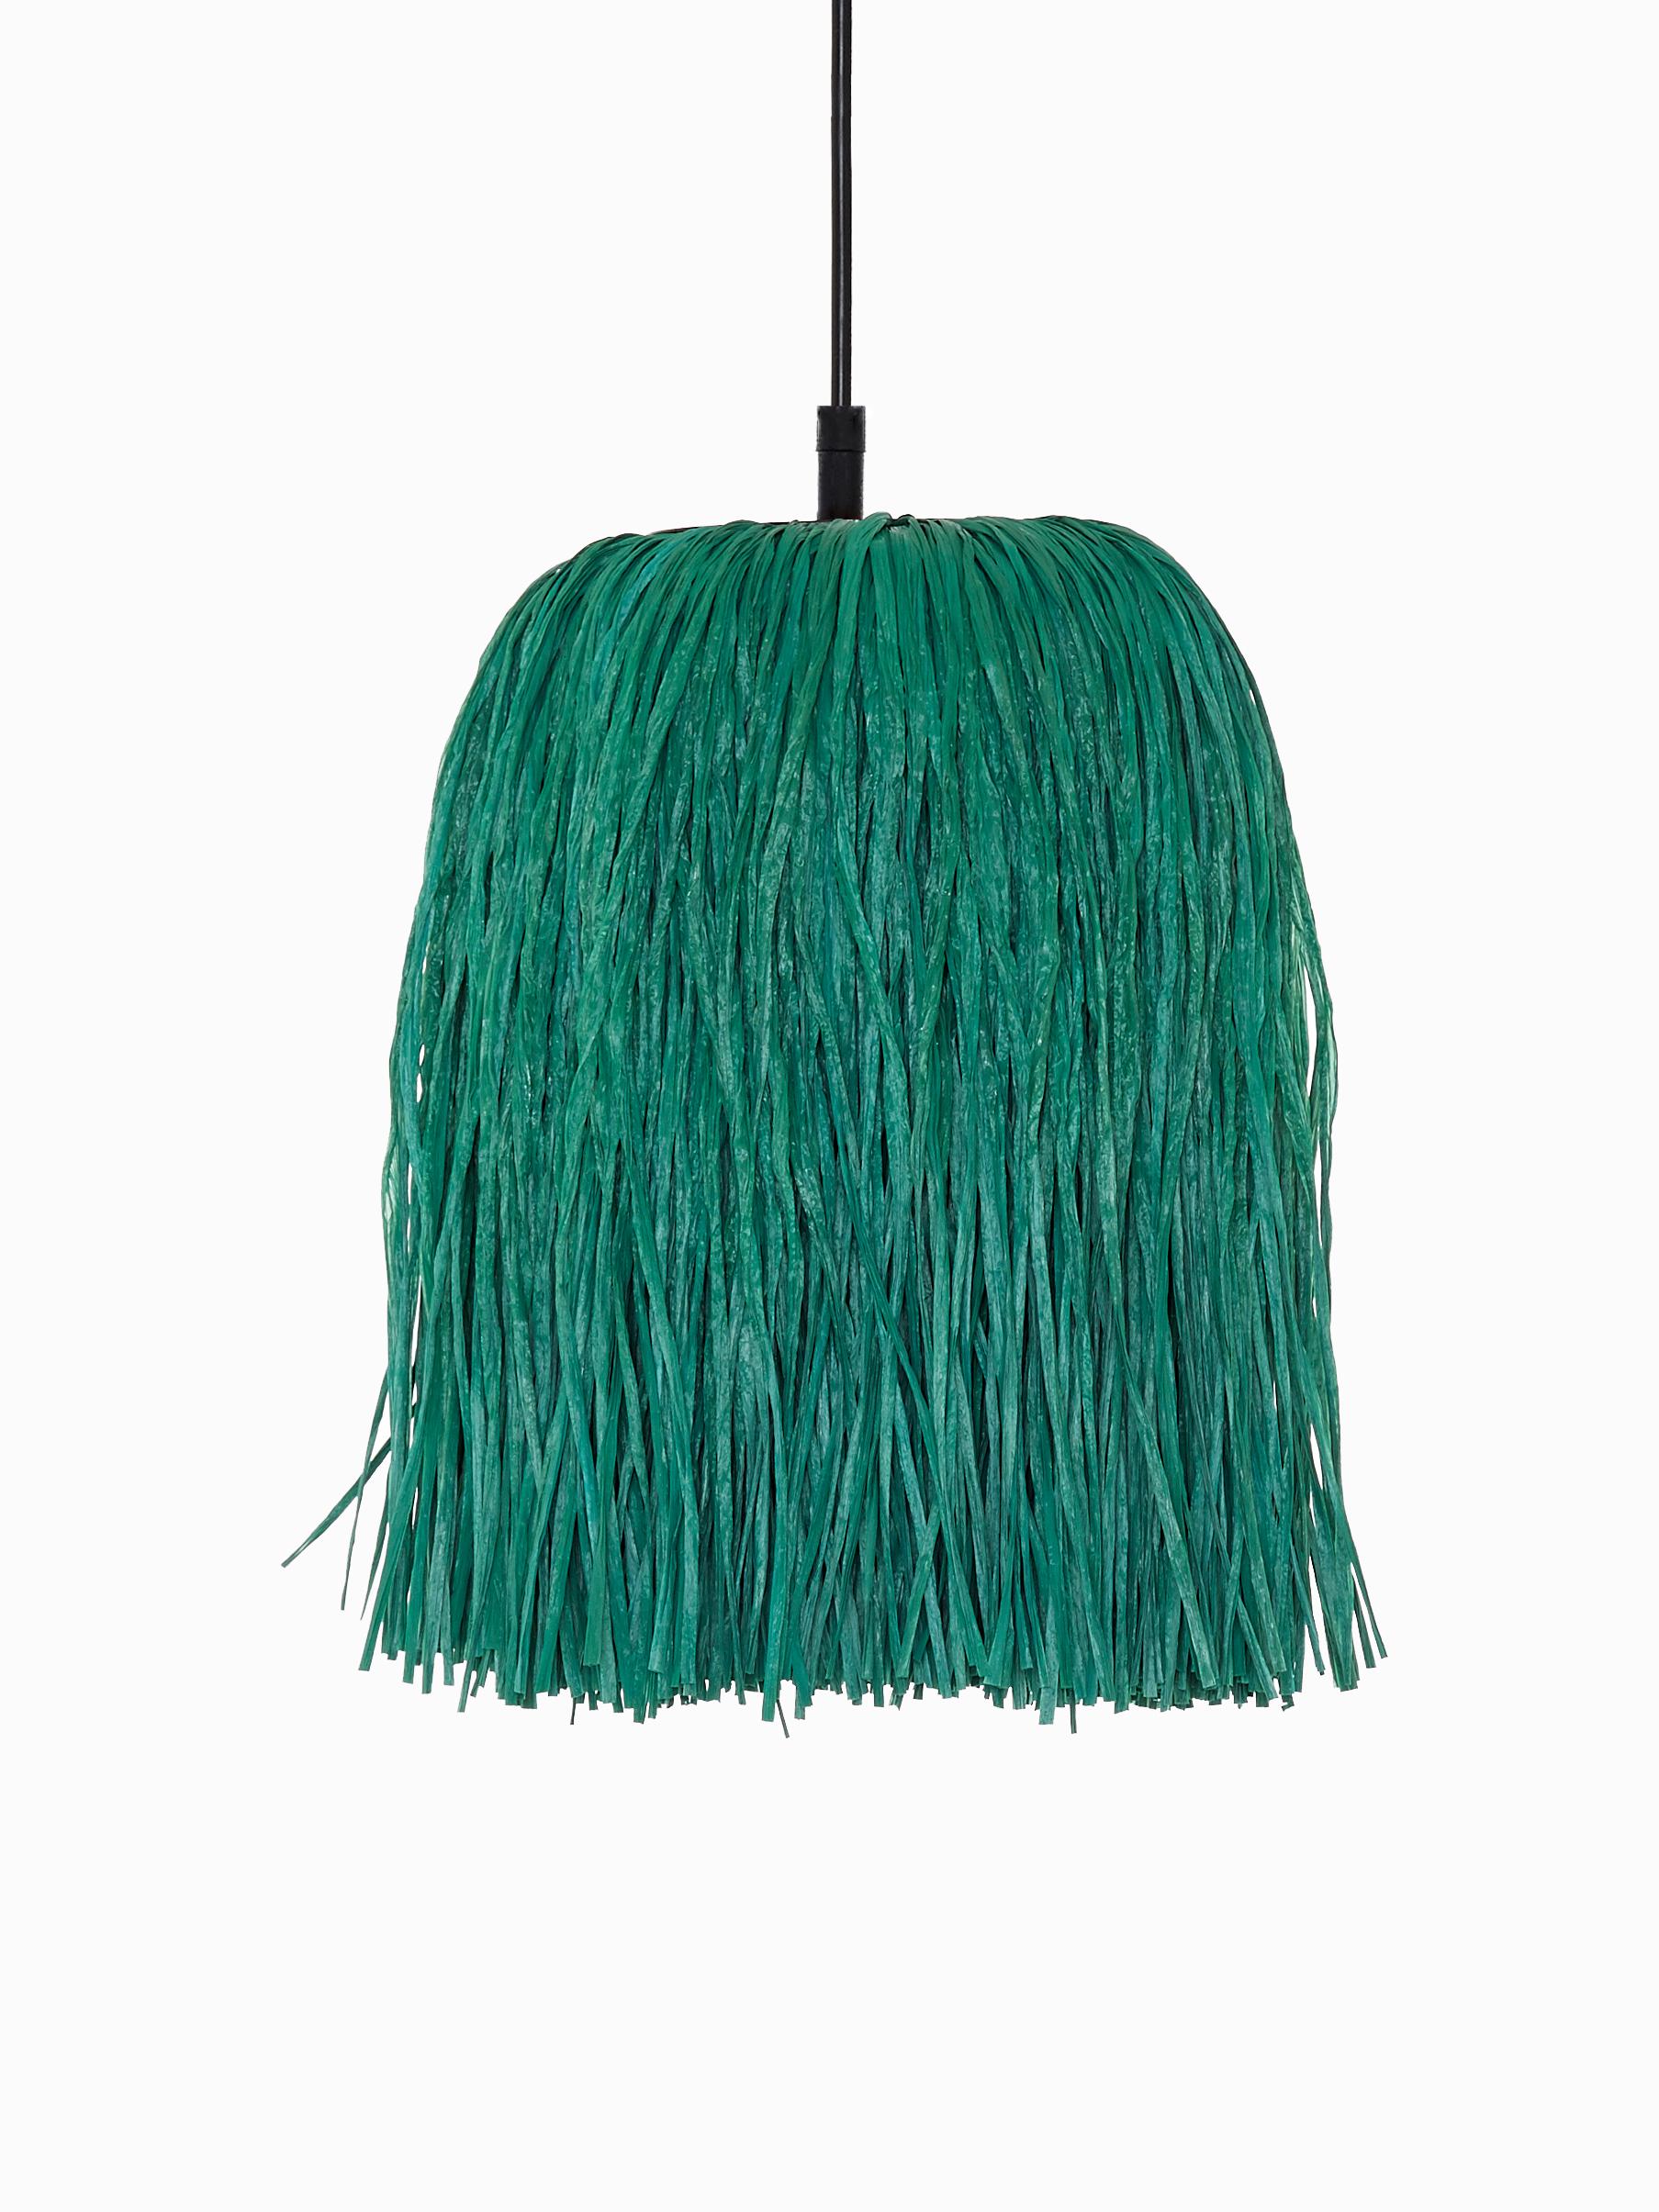 Green Fran XS lamp by Llot Llov
Handcrafted Light Object
Dimensions: Ø 24 cm x H 30 cm
Materials: raffia fringes
Also available in green, red, black, beige 

With their bulky silhouette and rustling fringes, the FRAN lights are reminiscent of